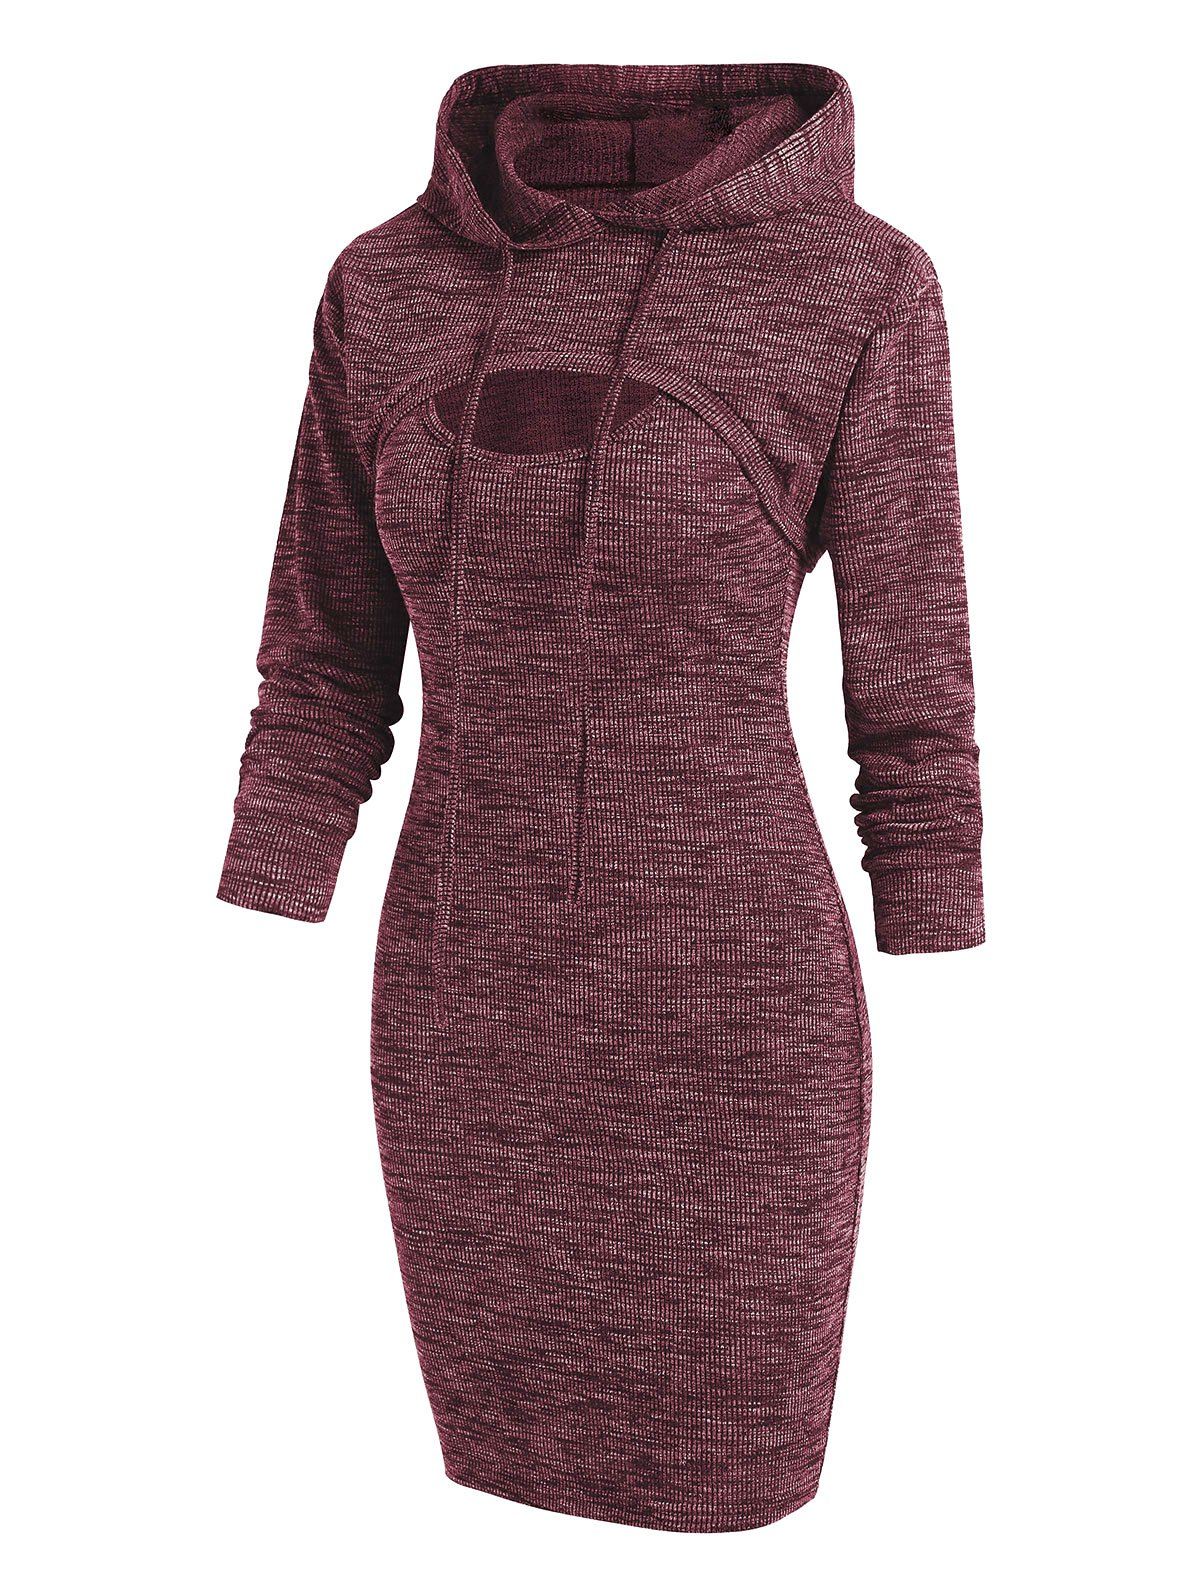 Heathered Knitted Bodycon Dress and Shrug Hoodie Set - DEEP RED S